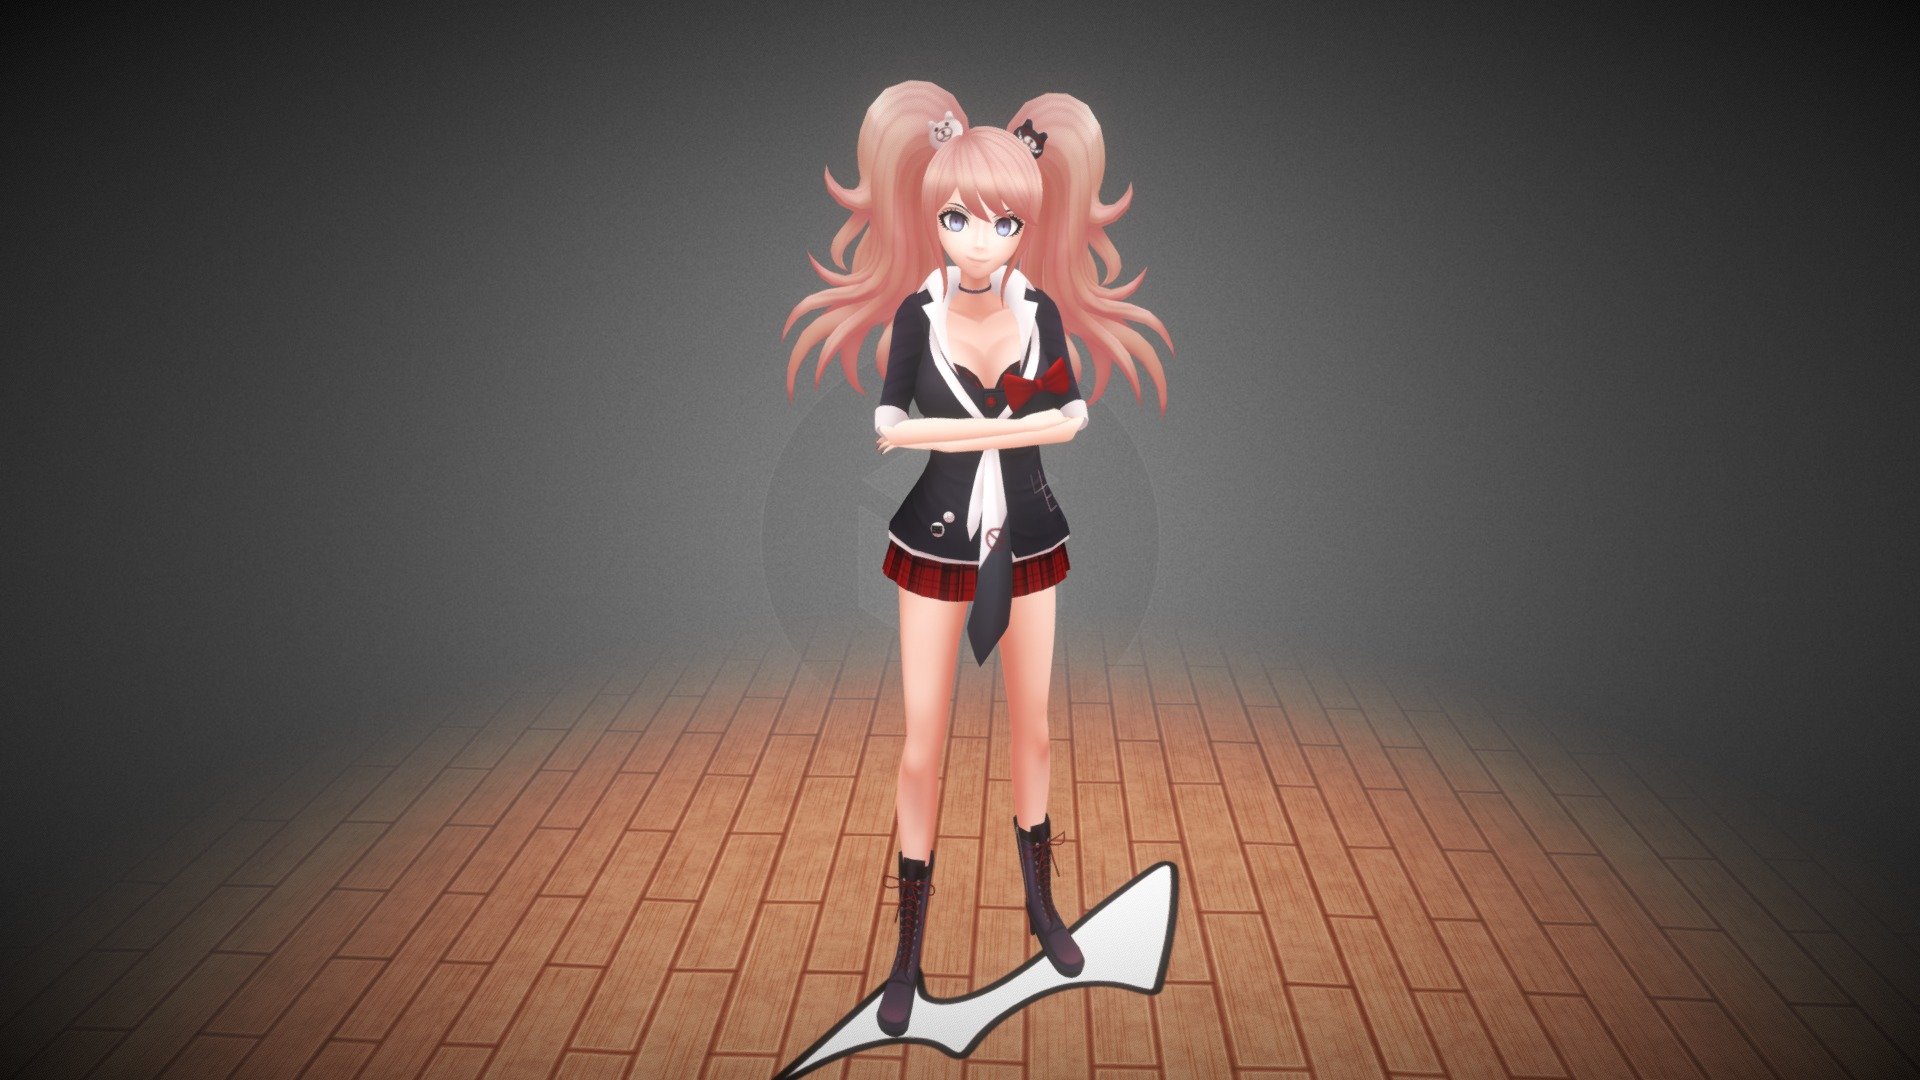 Junko enoshima from danganronpa trigger happy havoc, design based off her anime character sheet

Models and textures by me, character and designs by Spike Chunsoft - Junko Enoshima 3D model - 3D model by Numbers (@Sennanon) 3d model